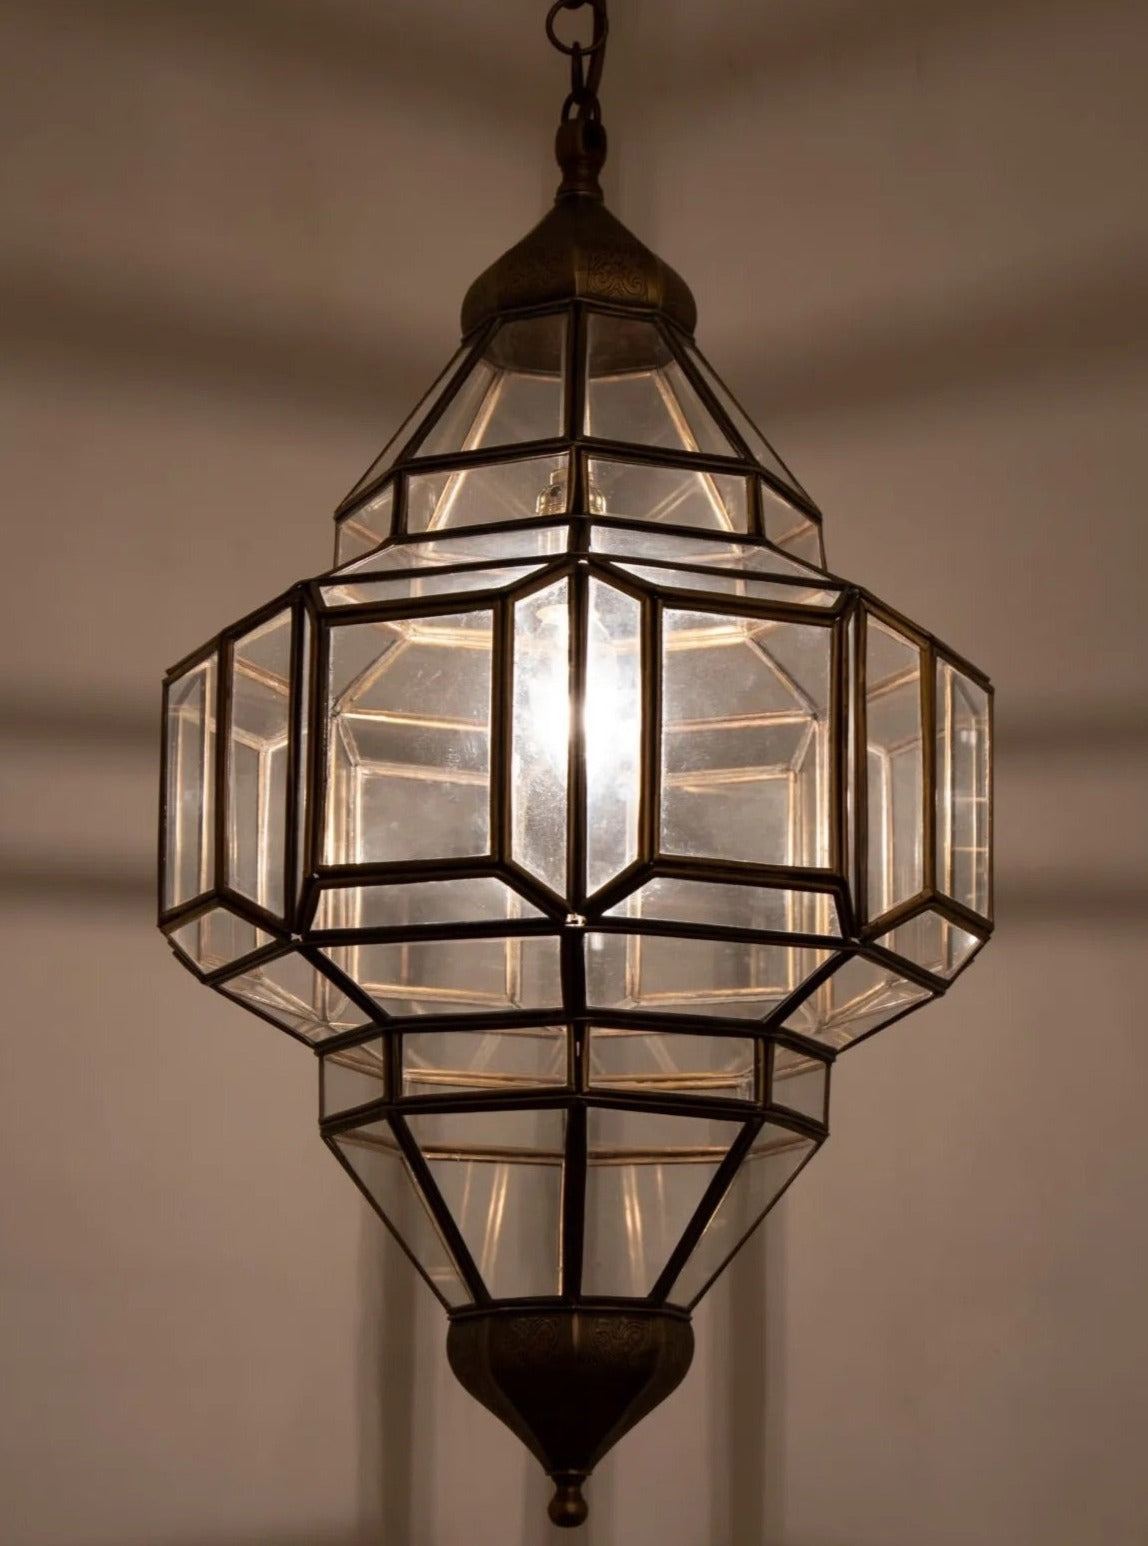 Moroccan Glass Ceiling Lamp - Ref. 1192